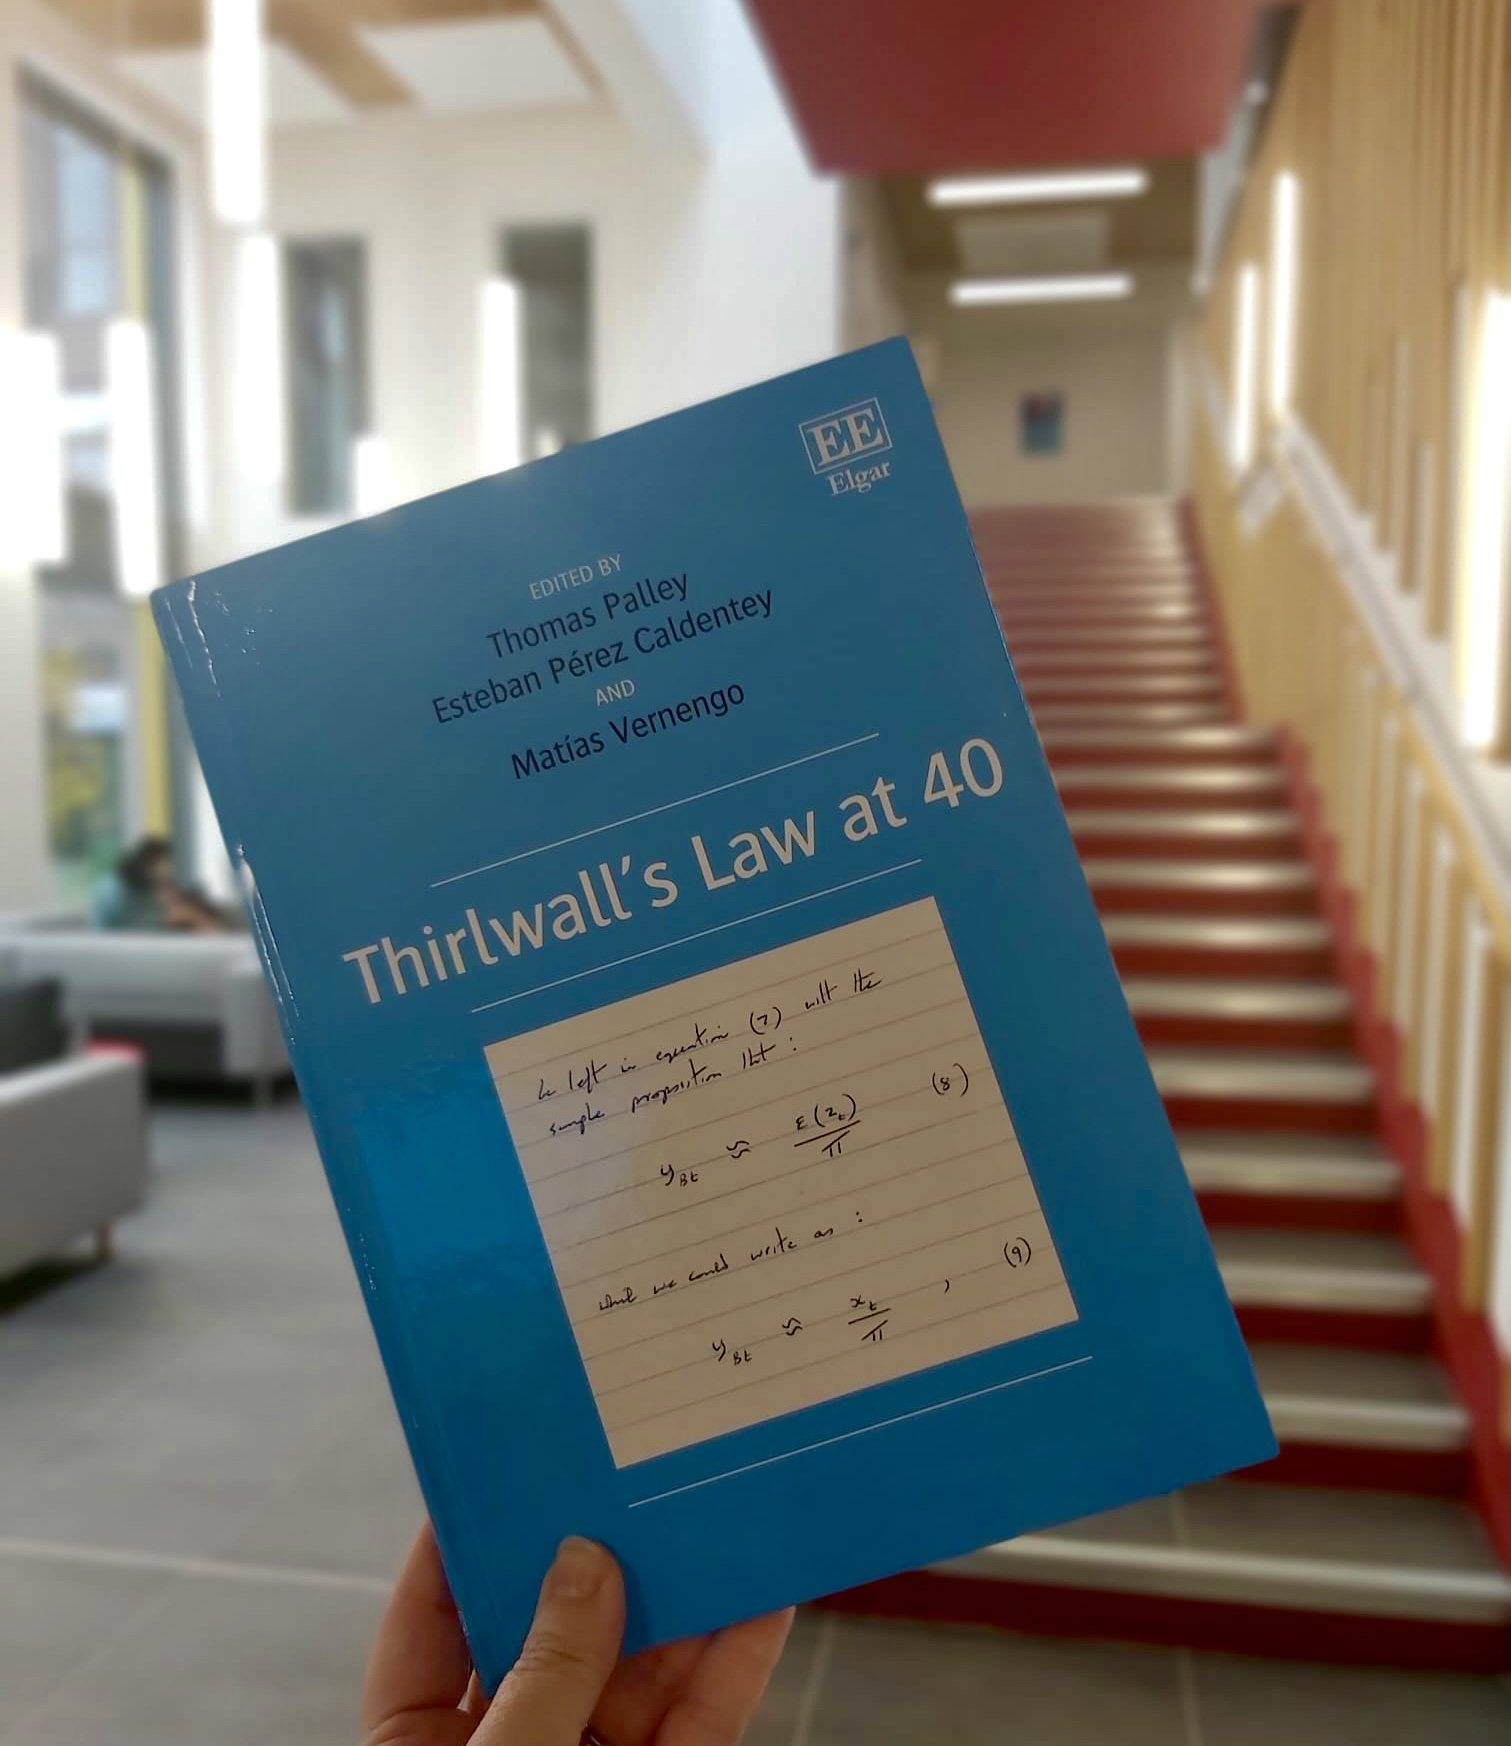 Thirwall's Law at 40, a new edition photographed in the Kenendy building.